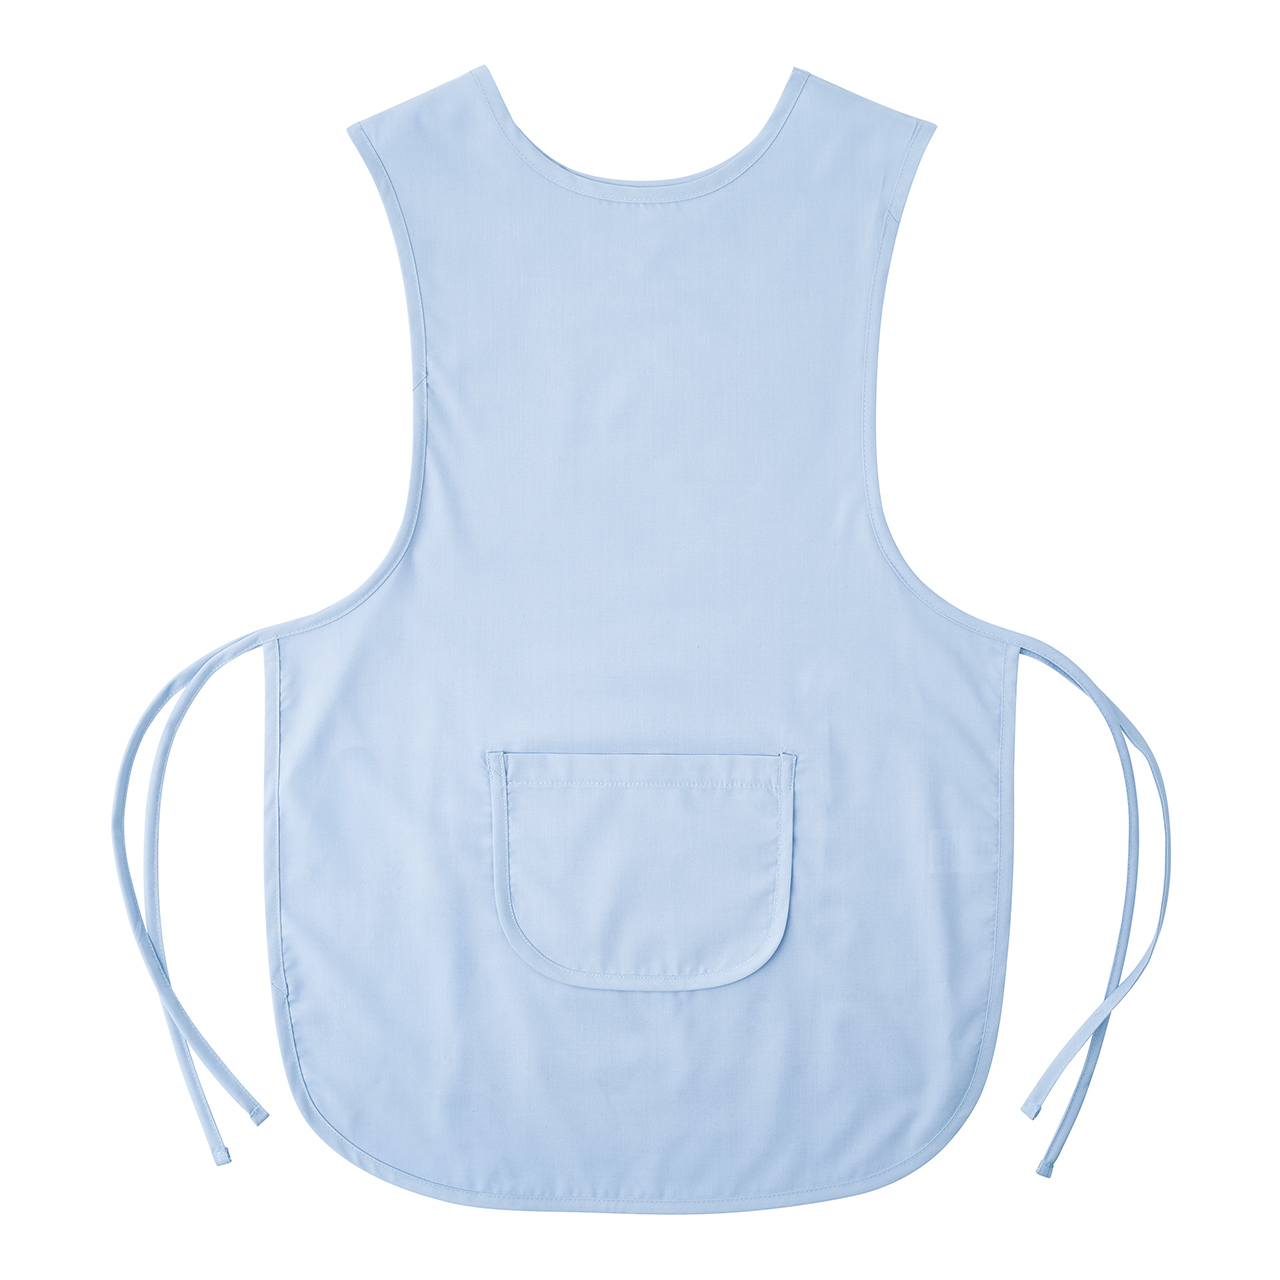 Household Tabards, Pack of 2